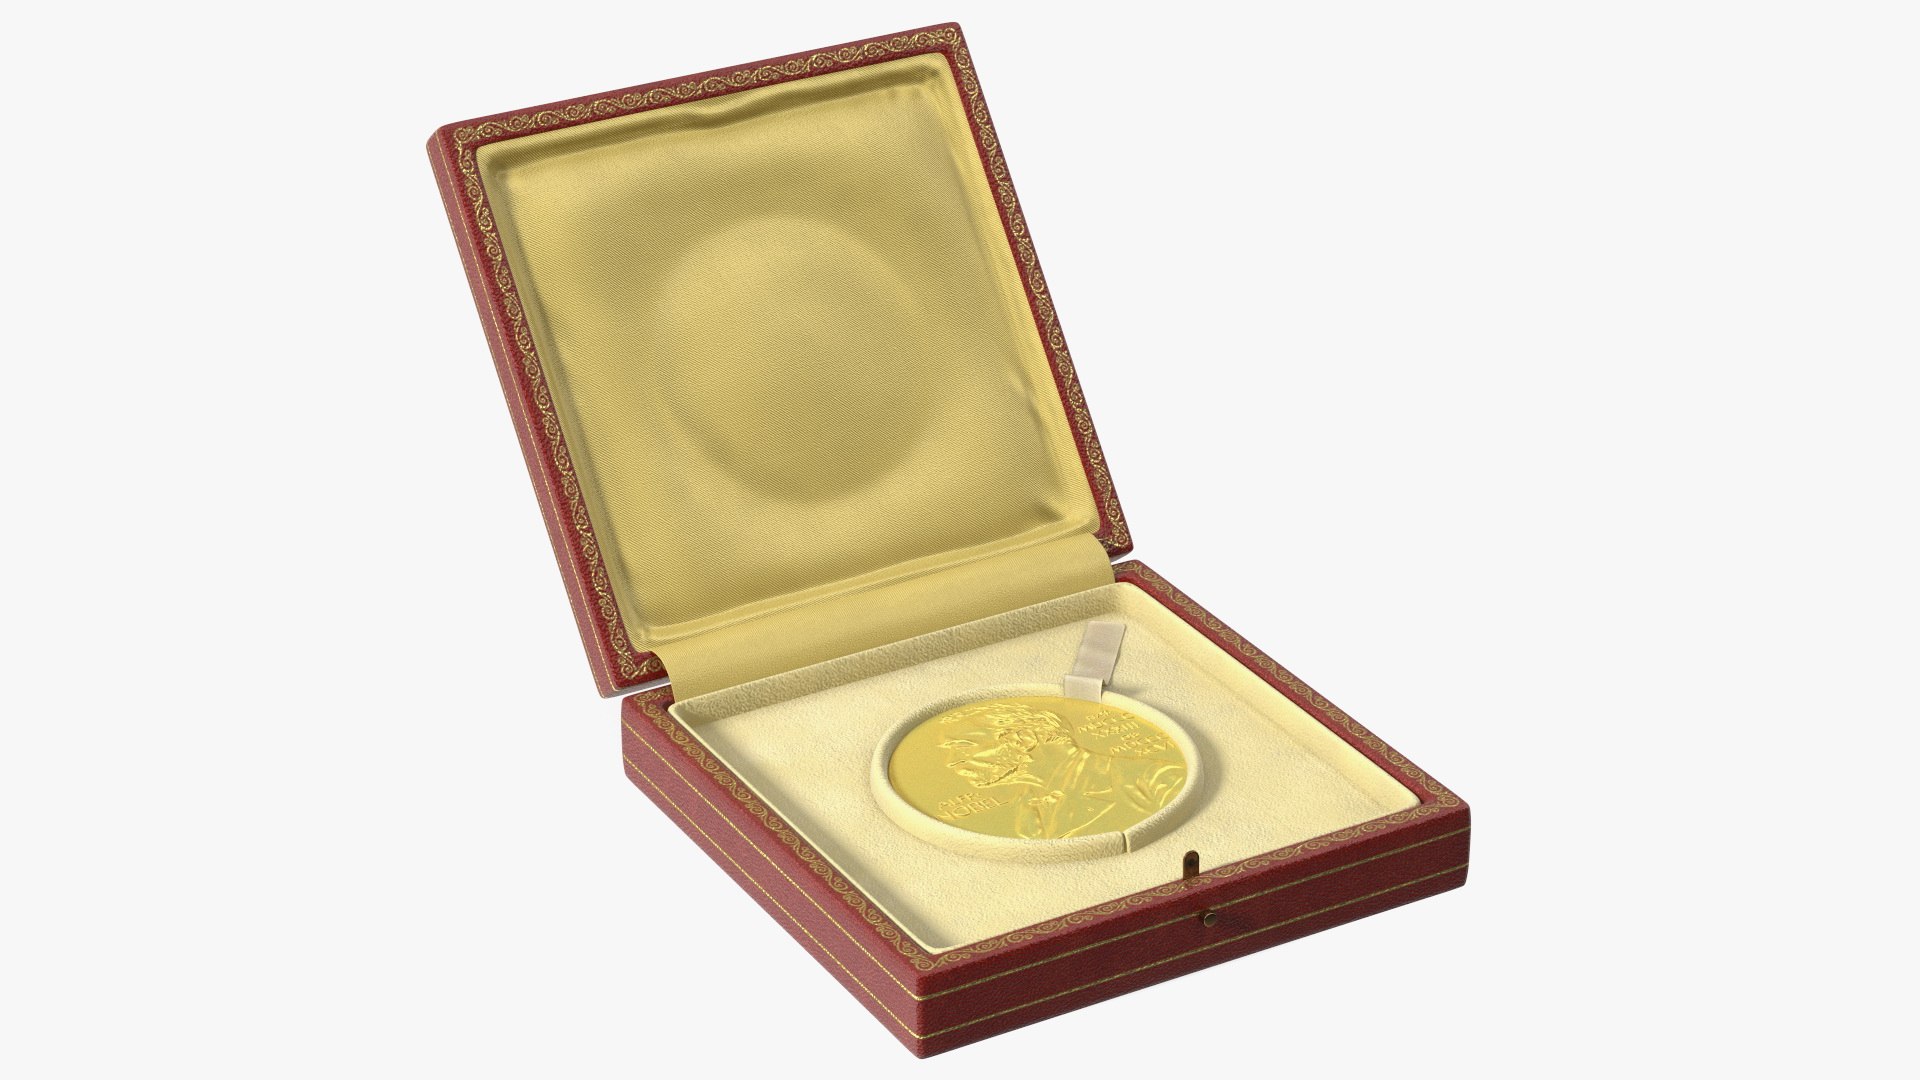 3D Nobel Prize with Box for Physics and Chemistry model https://p.turbosquid.com/ts-thumb/tx/29uwq8/9e/nobelprizewithboxforphysicsandchemistryvray3dmodel001/jpg/1644515134/1920x1080/fit_q87/182d89f8508a857785f80f5f9f59b713bafceb8d/nobelprizewithboxforphysicsandchemistryvray3dmodel001.jpg